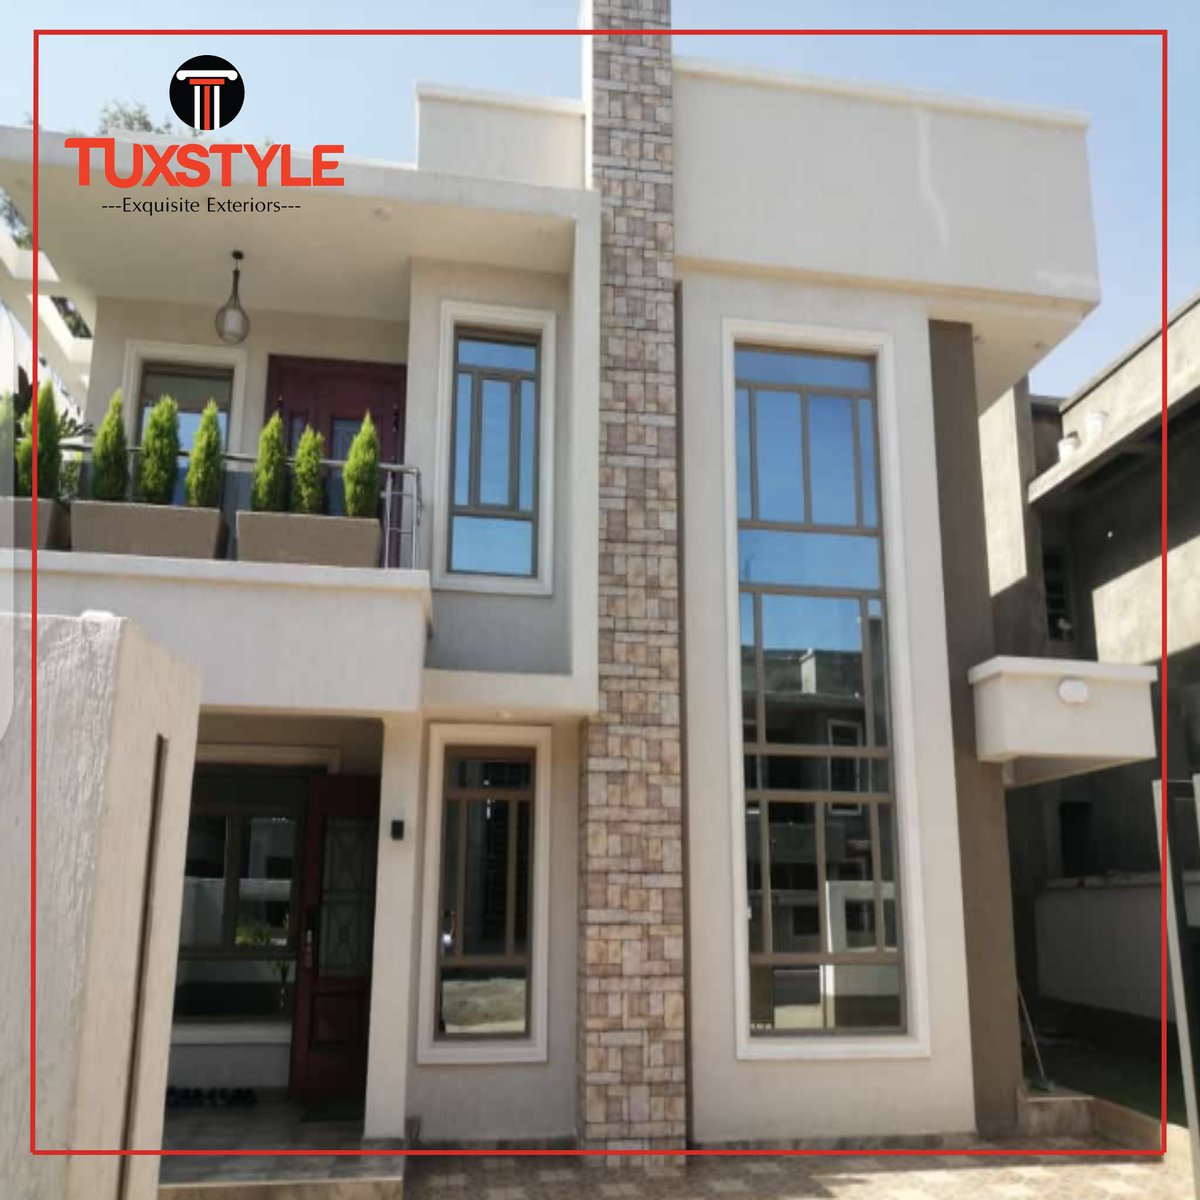 The only way around is through......

#EPS #construction #tuxtrim #cornice  #archdaily #madeinkenya🇰🇪 #facadedesign #home #tuxtouch #itsonlyintuxstyle #inspirationalfriday #exquisiteexteriors💯